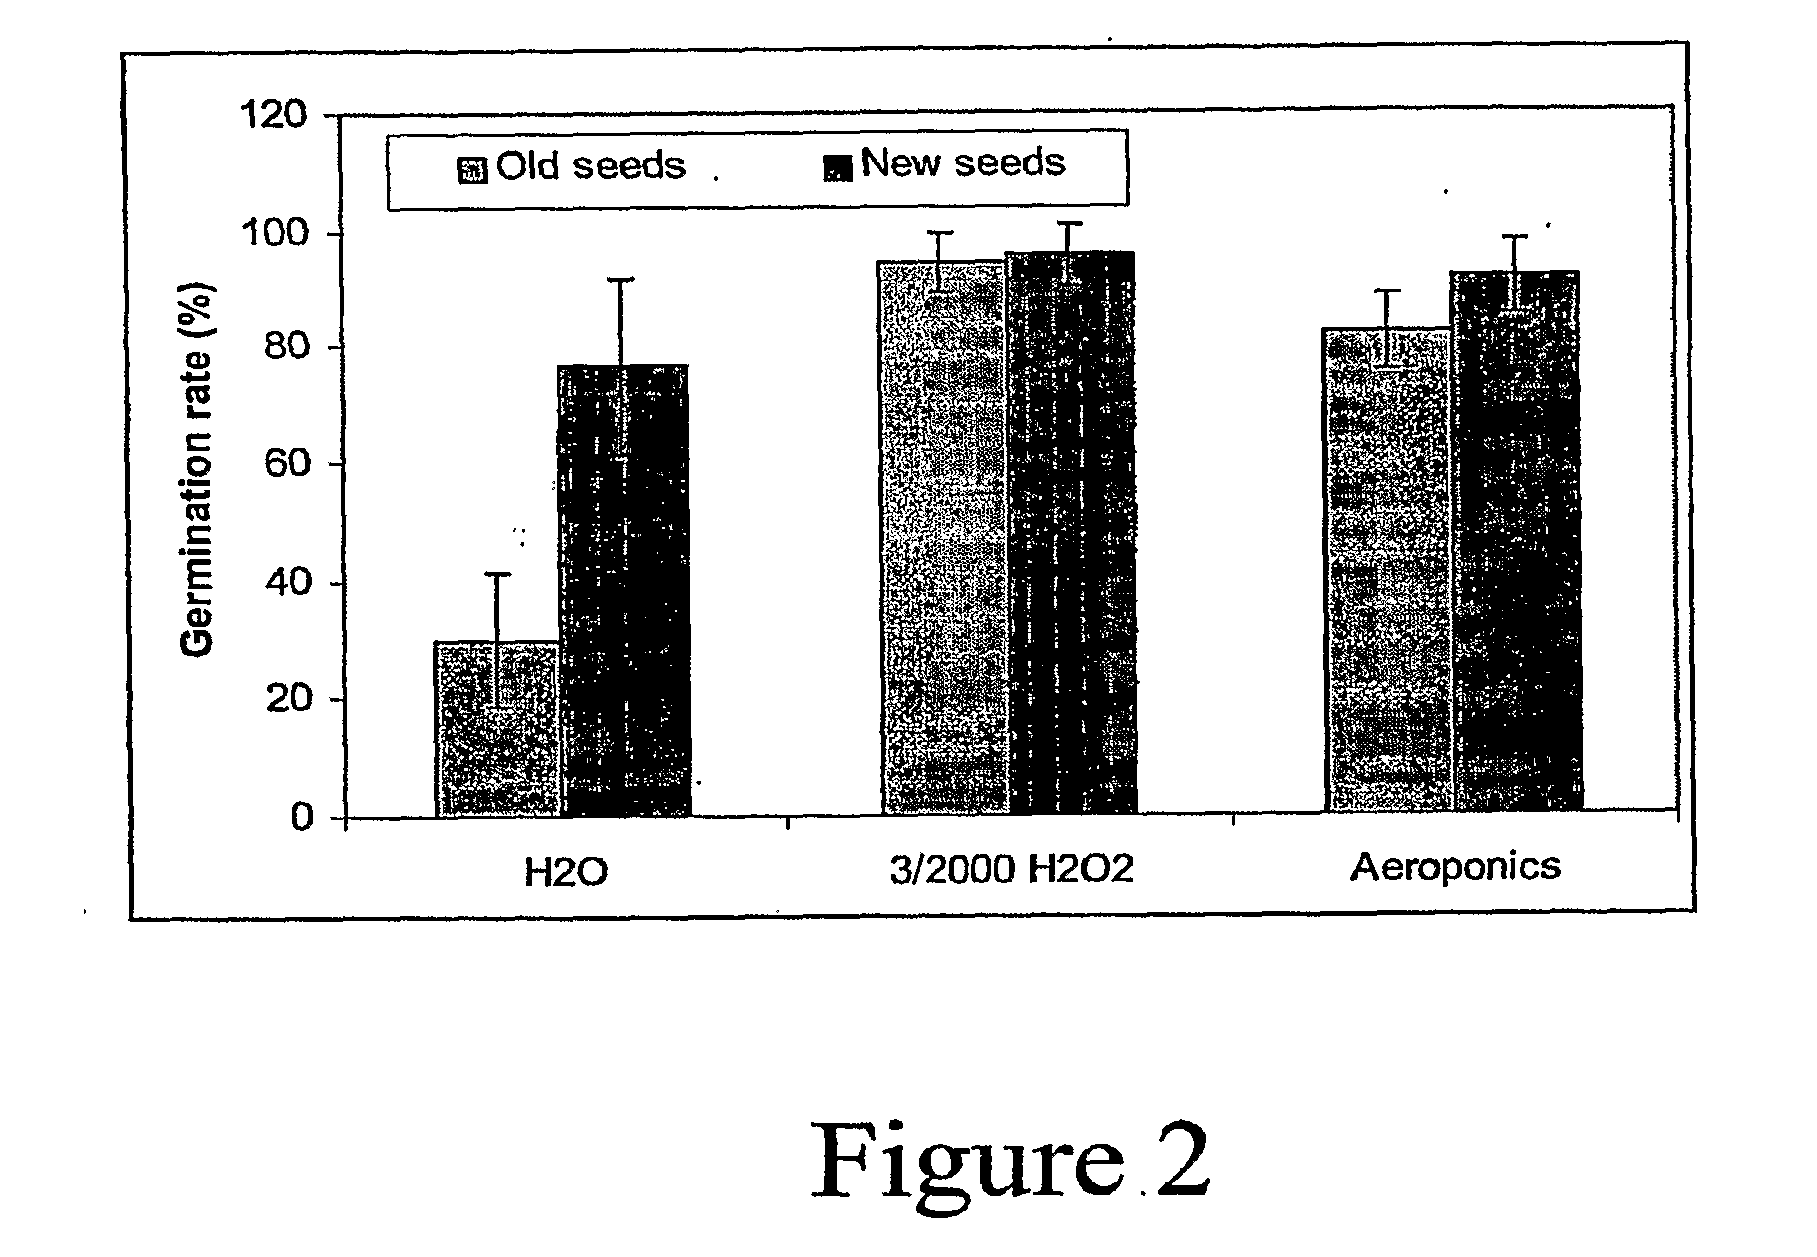 Materials and Methods for Providing Oxygen to Improve Seed Germination and Plant Growth